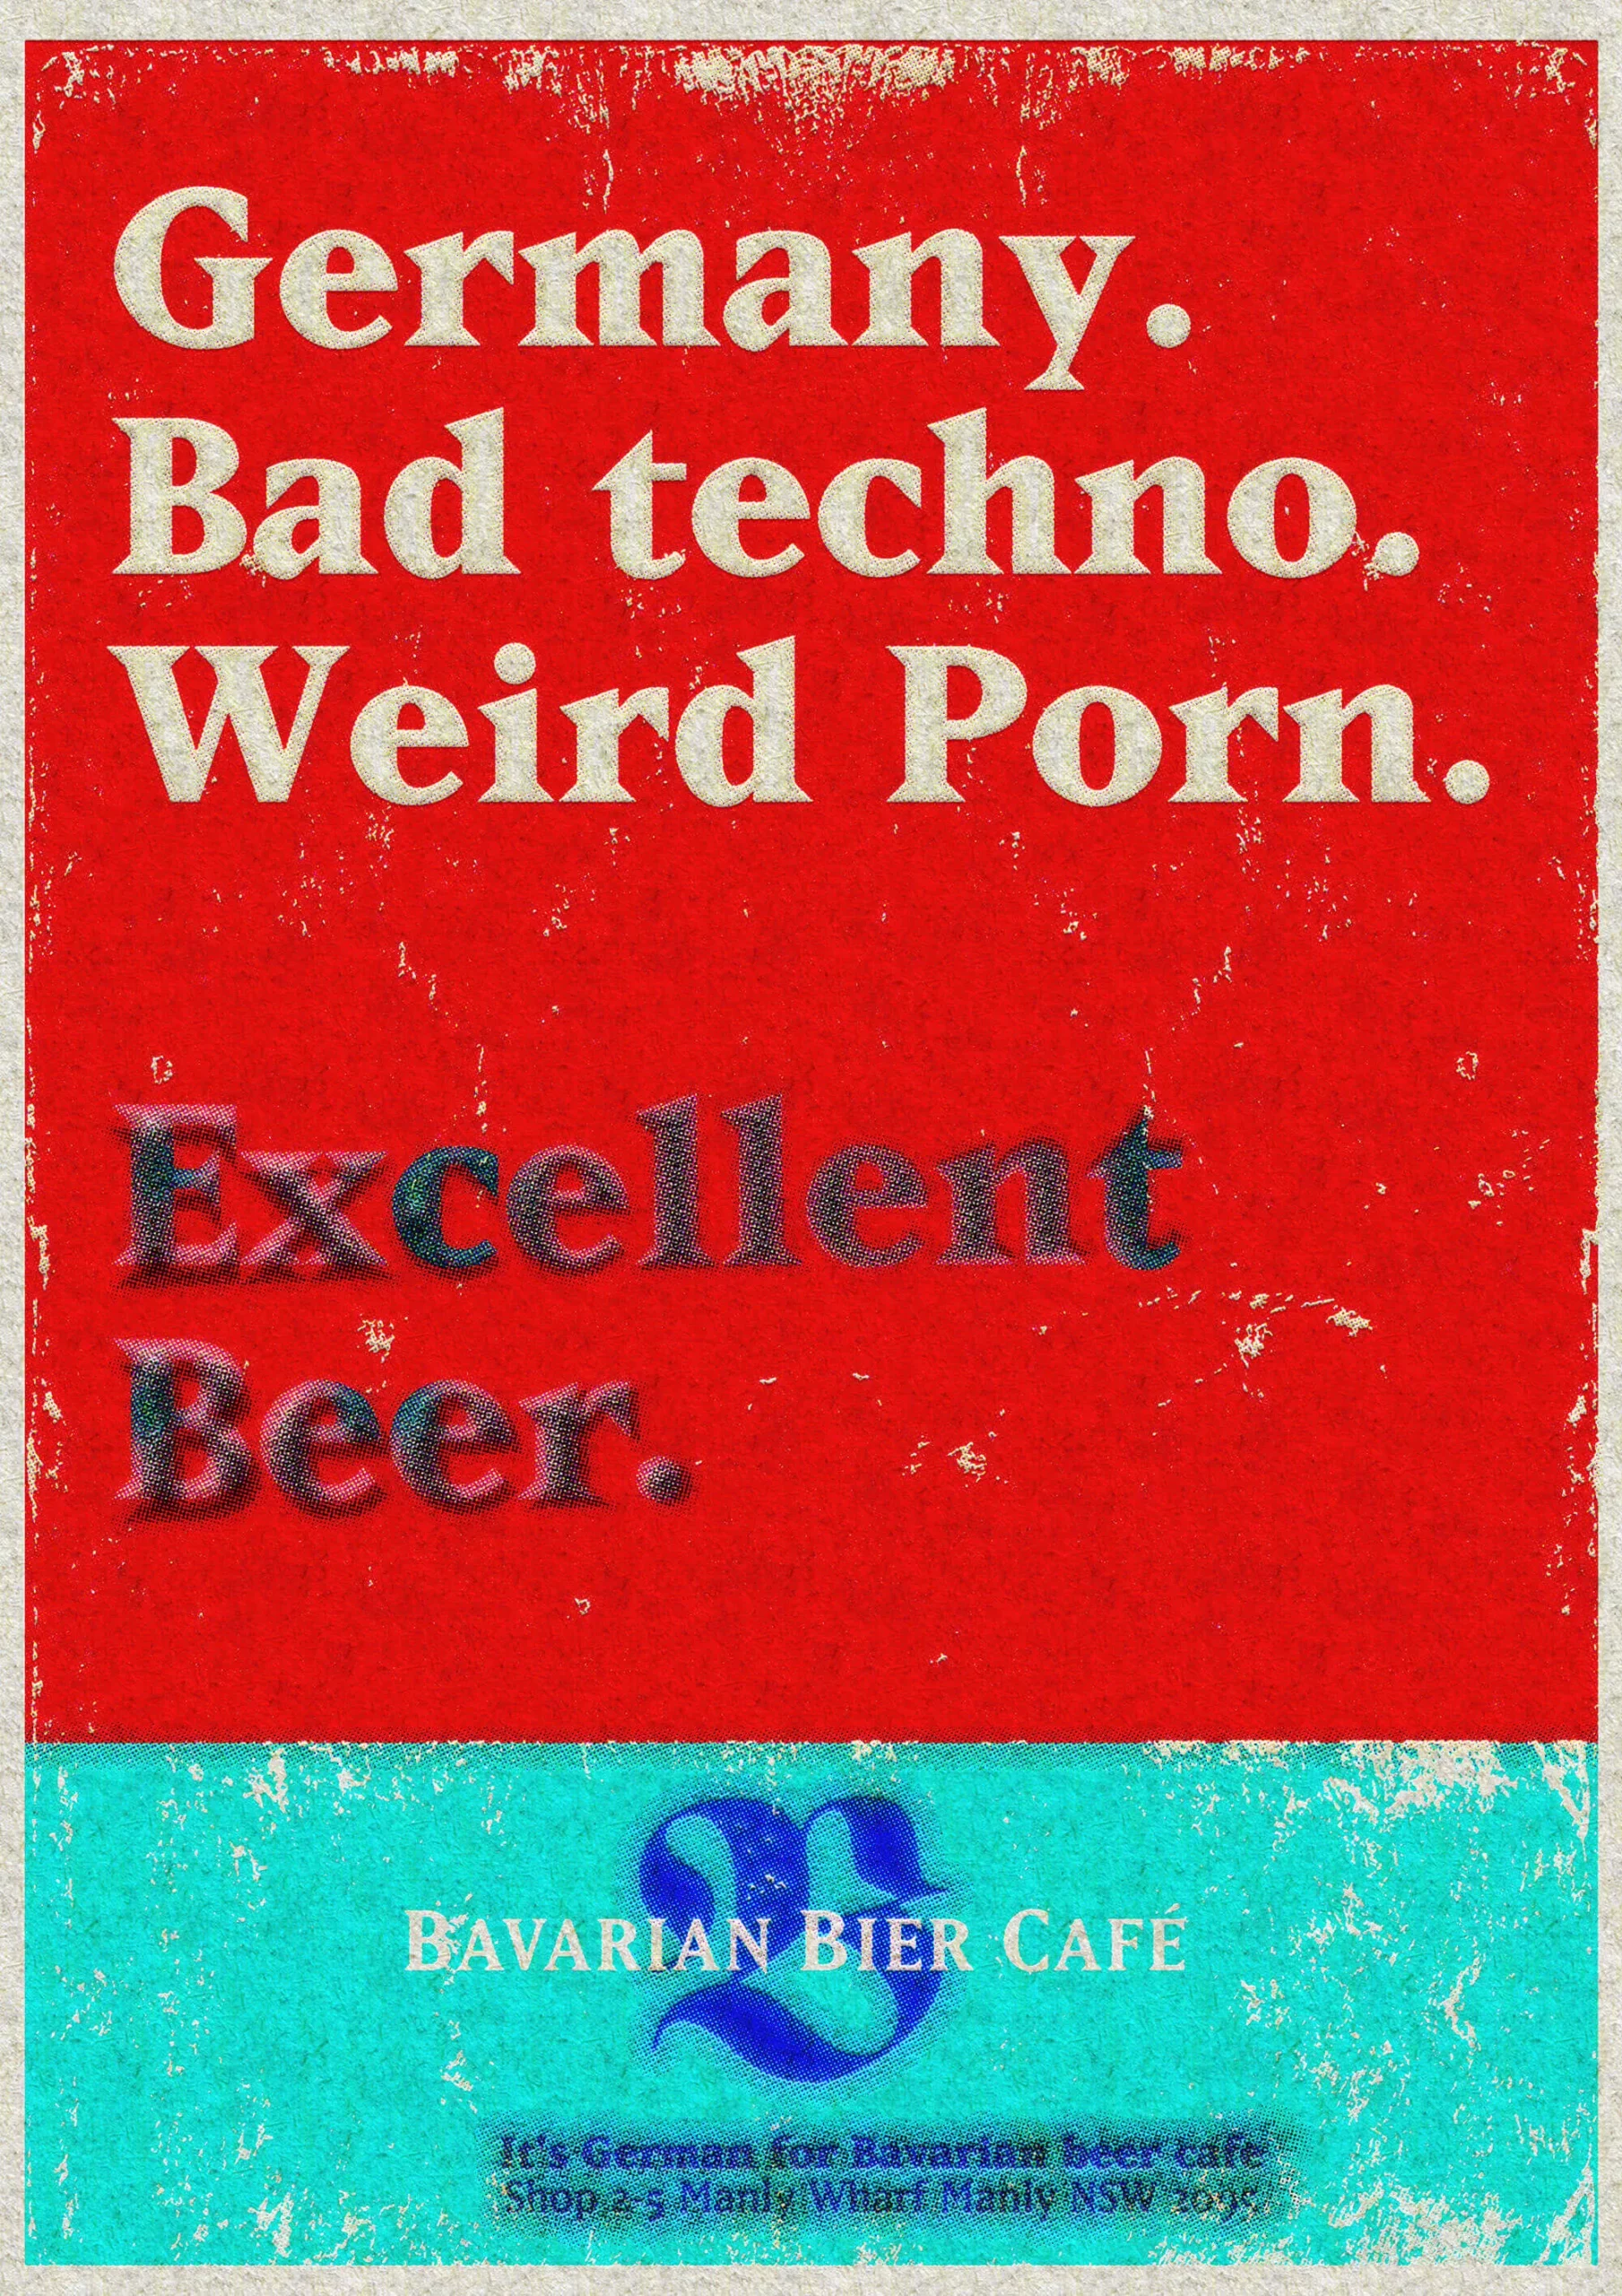 An advert for a Bavarian Bier Café that says "Germany. Bad techno. Weird porn. Excellent beer."